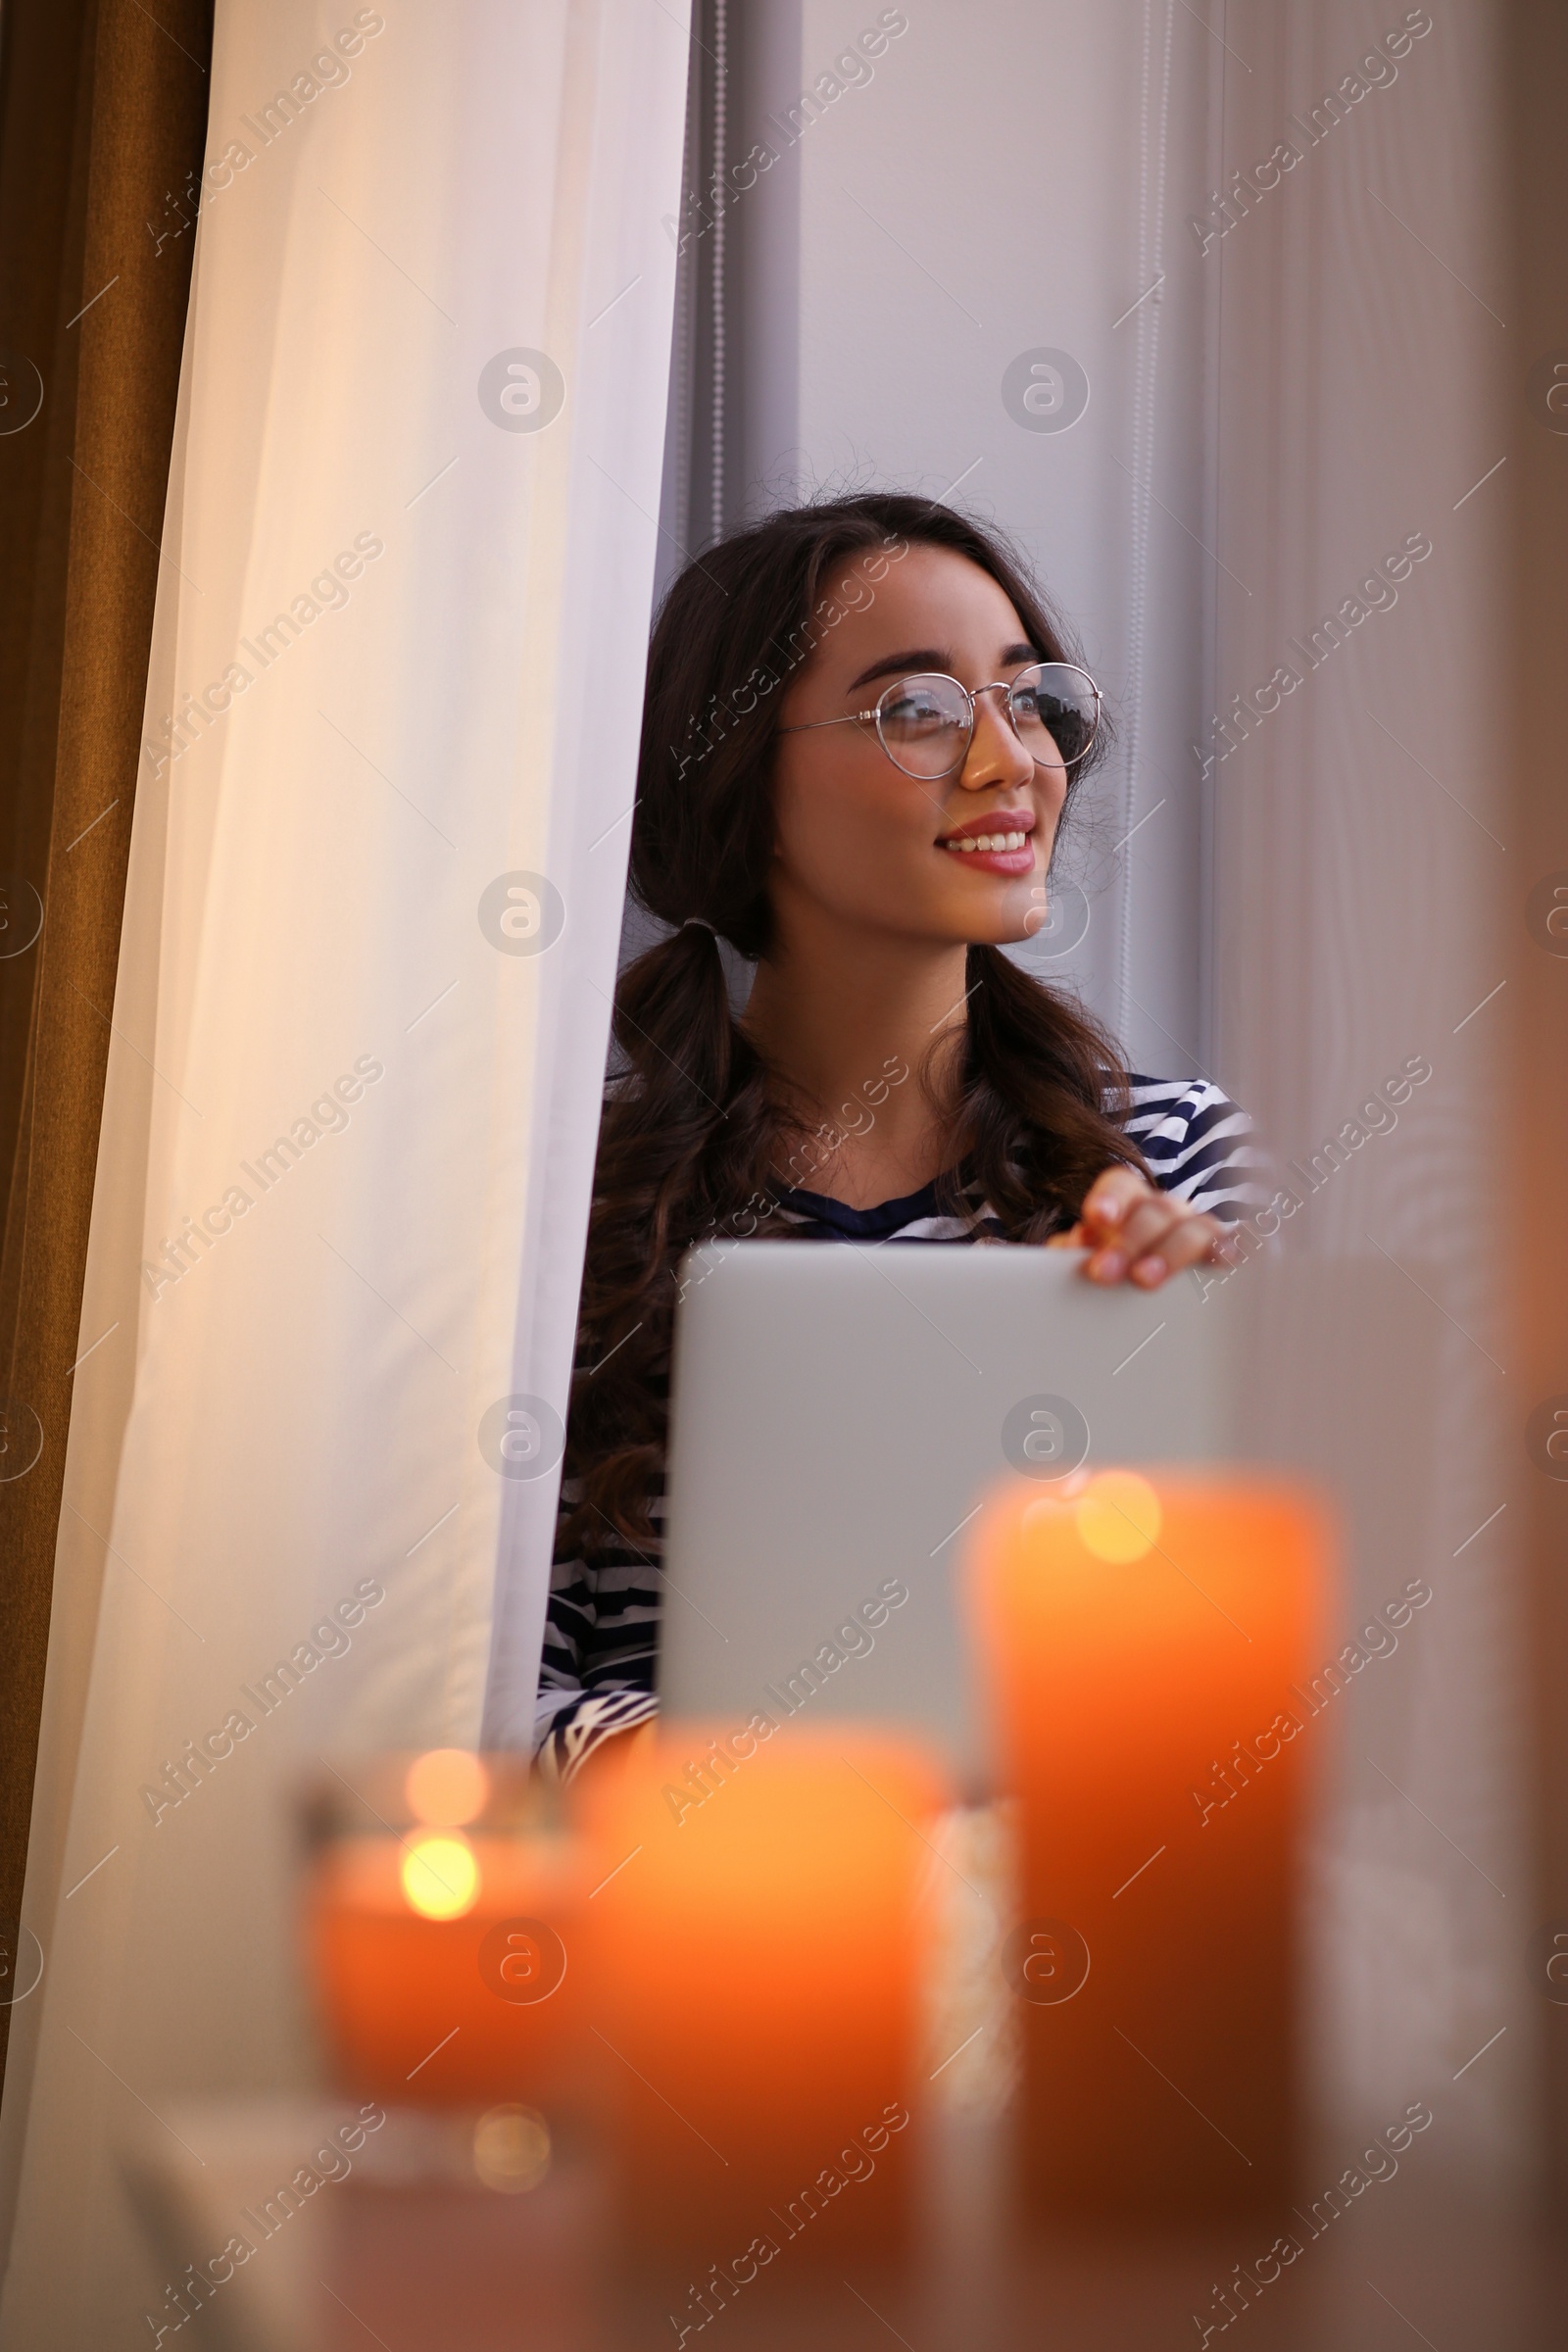 Photo of Young woman using laptop near window at home. Winter atmosphere